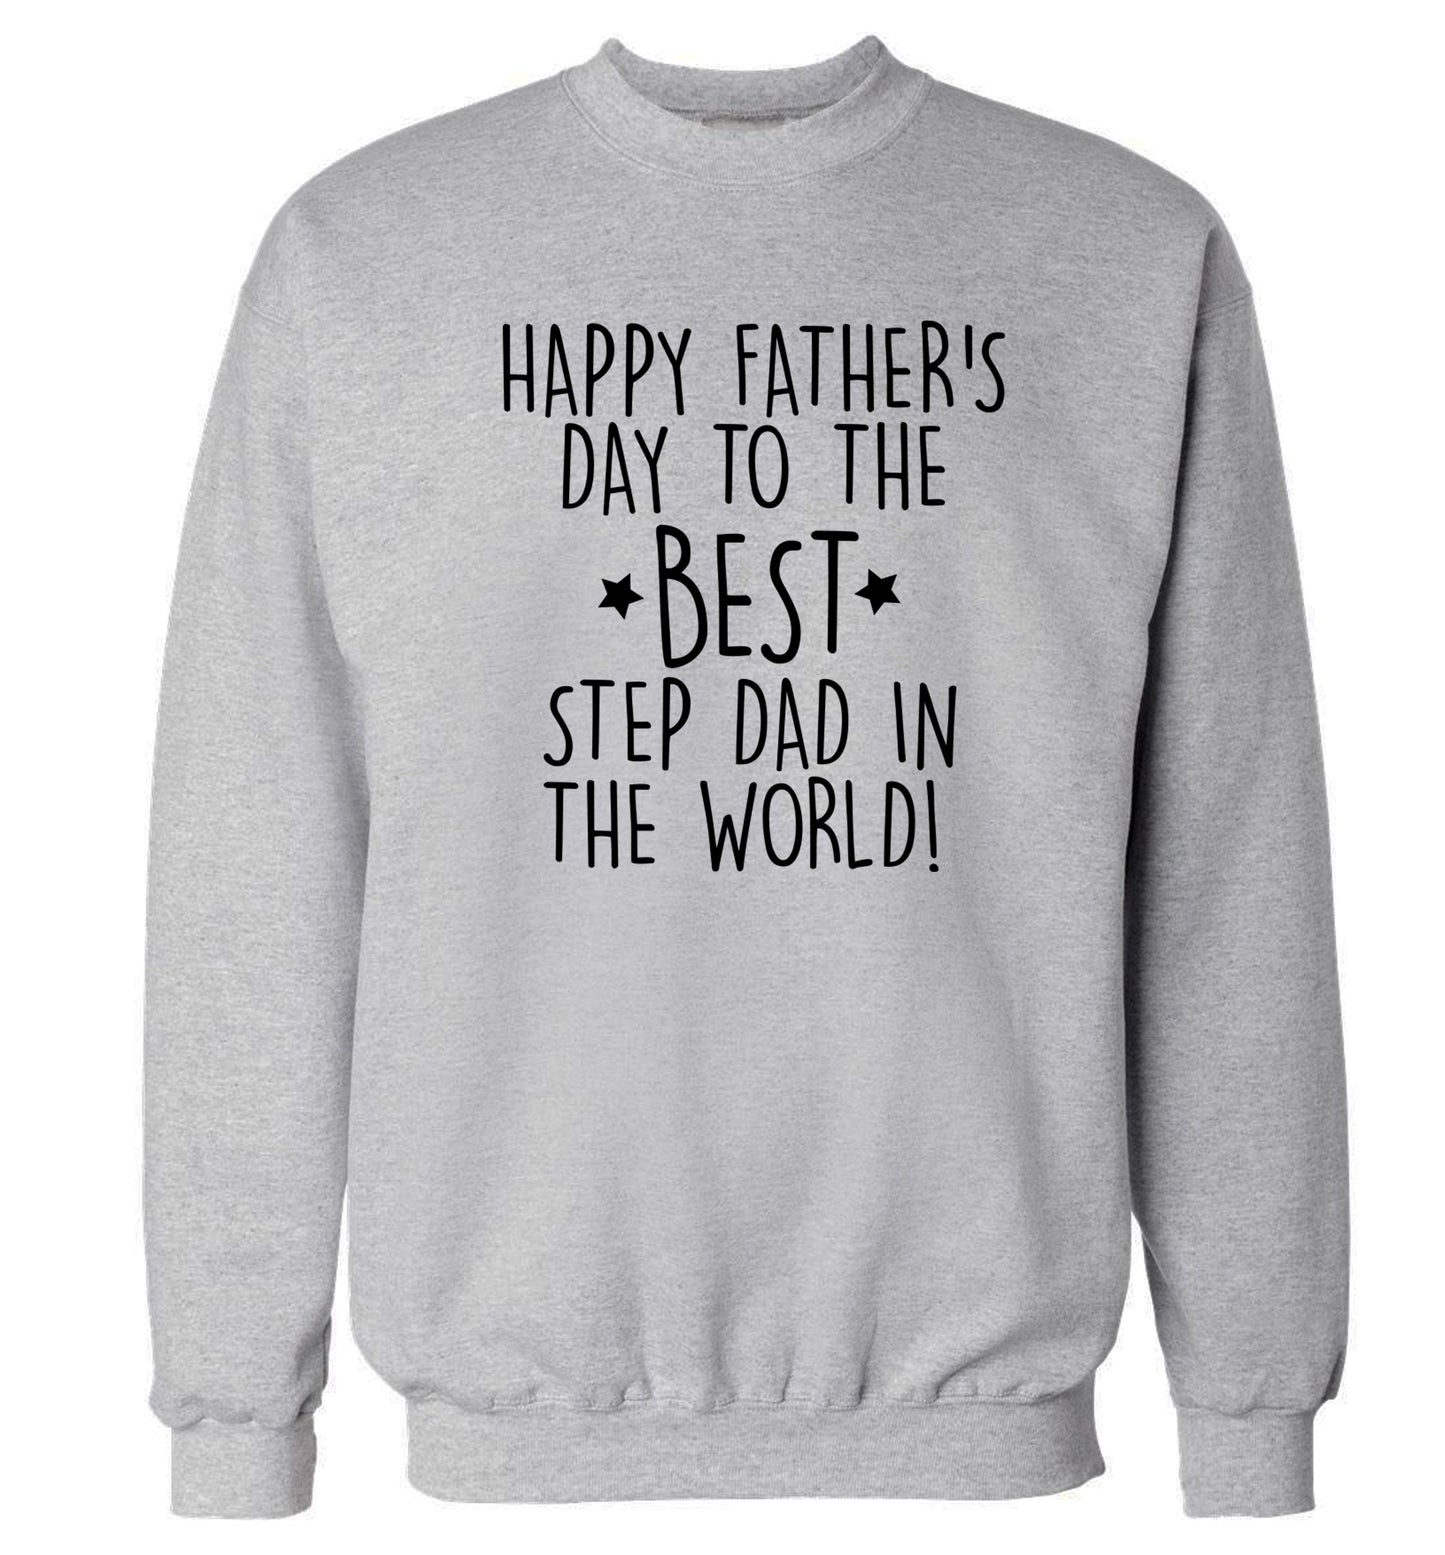 Happy Father's day to the best step dad in the world! Adult's unisex grey Sweater 2XL